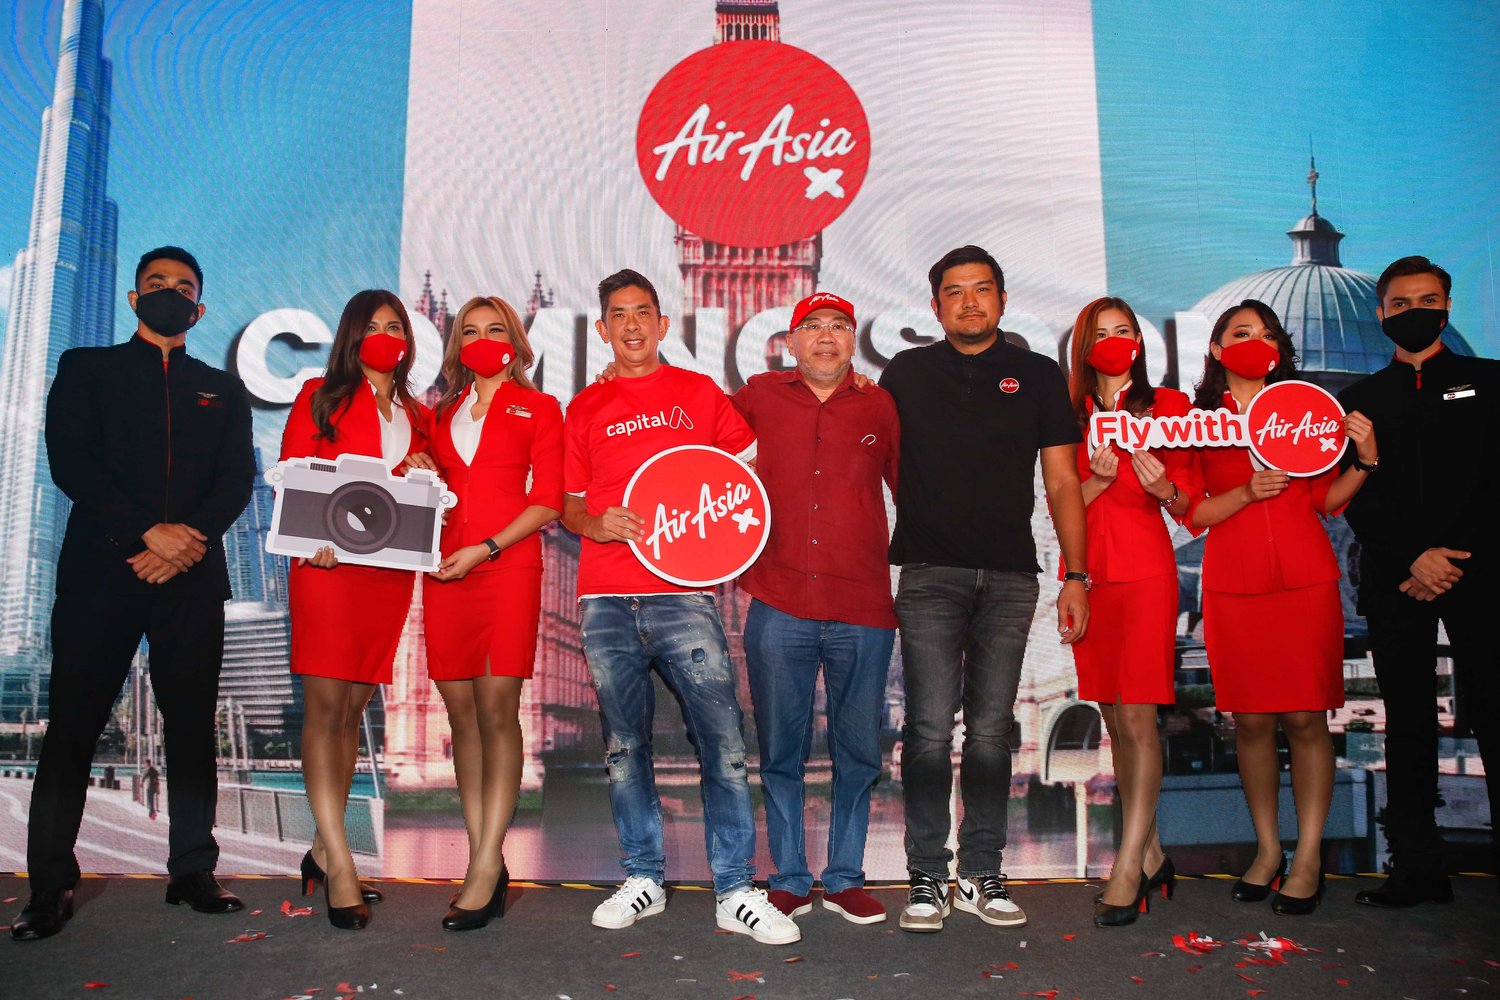 (Fourth from left) Colin Currie, President (Commercial) of Capital A; Datuk Kamarudin Meranun, Executive Chairman of Capital A; and Benyamin Ismail, CEO of AirAsia X at the AirAsia X relaunched event held in Kuala Lumpur today.